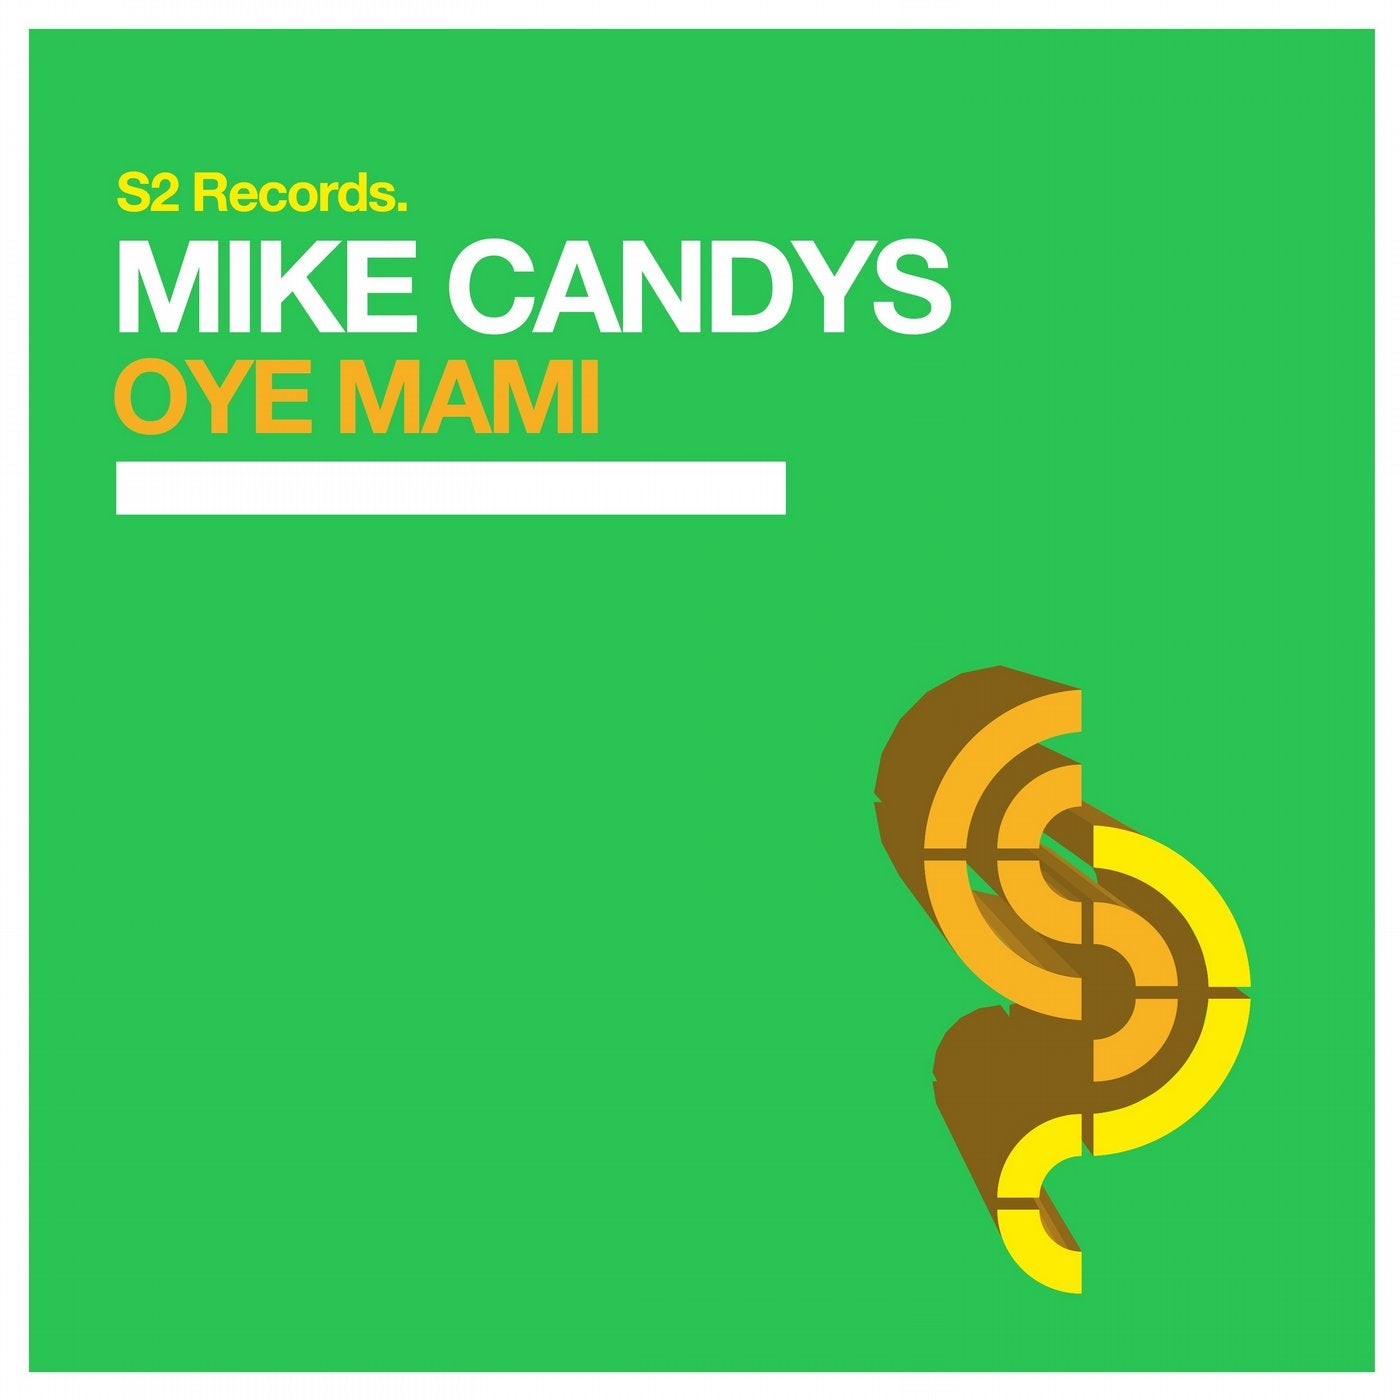 Oye Mami (Original Club Mix) by Mike Candys on Beatport